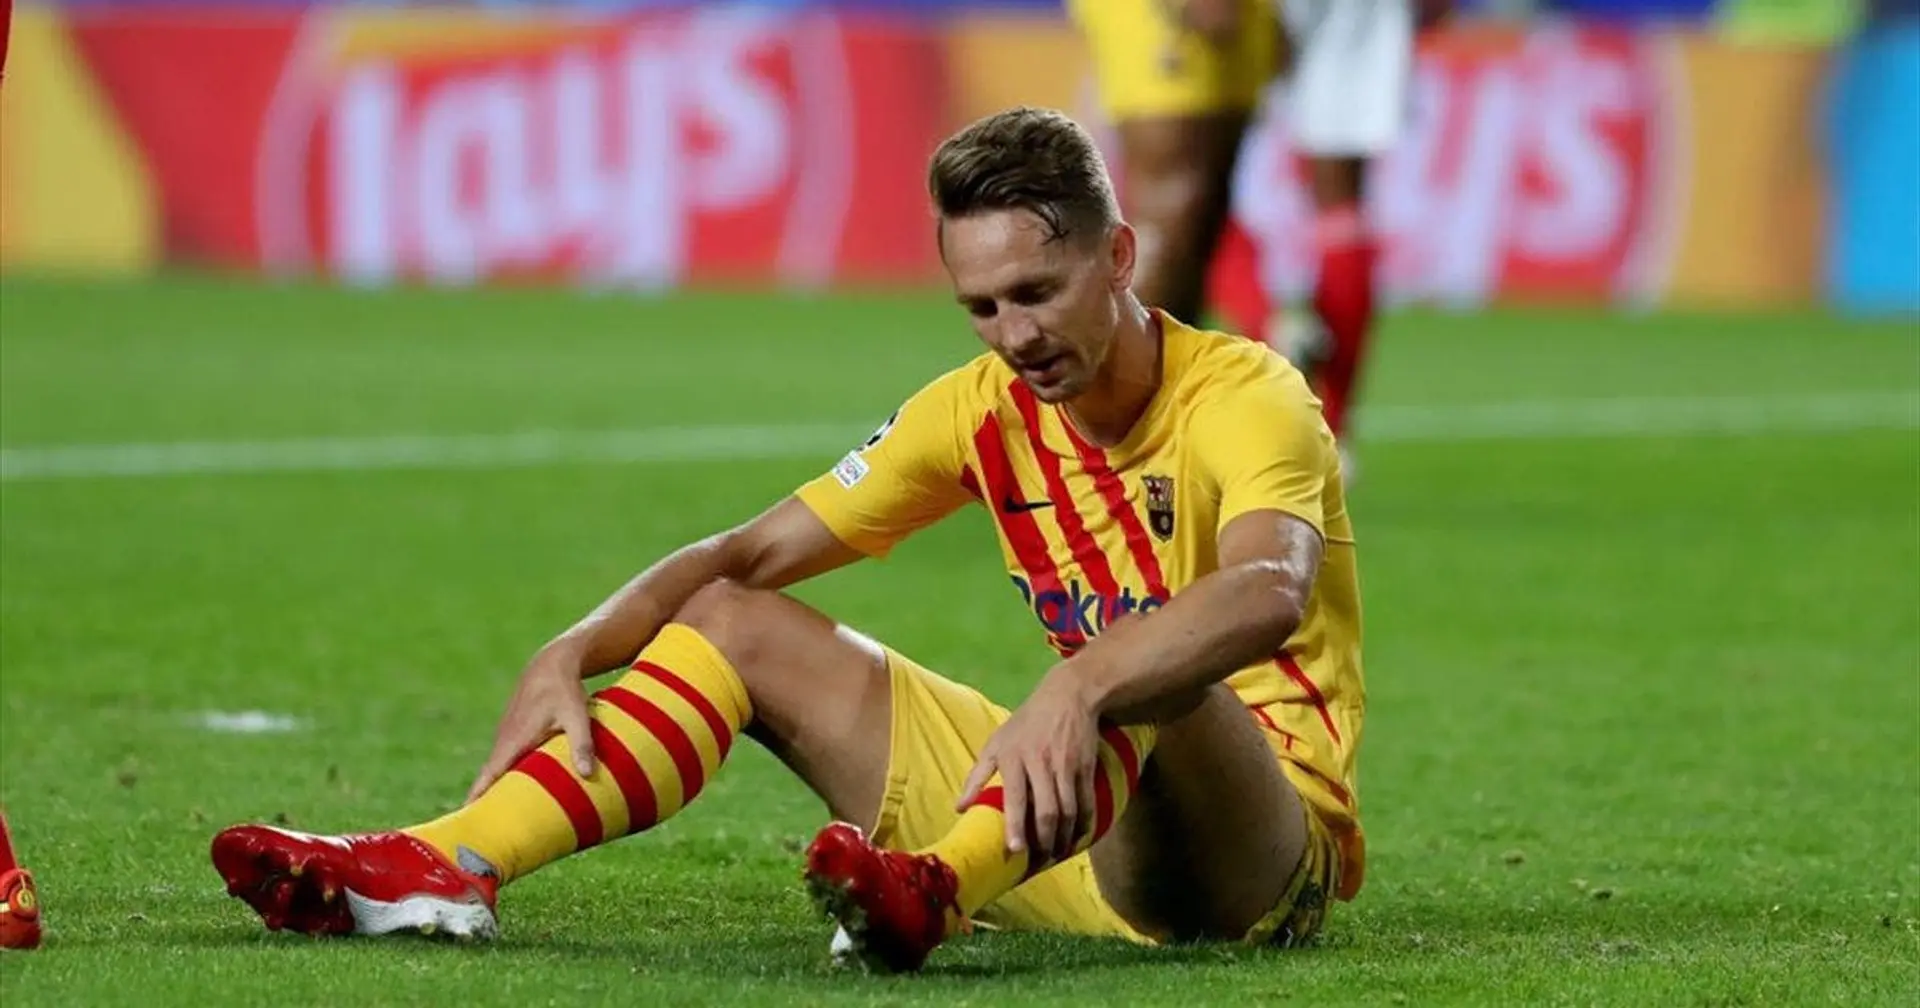 Fenerbahce interested in taking Luuk de Jong from Barca (reliability: 4 stars)